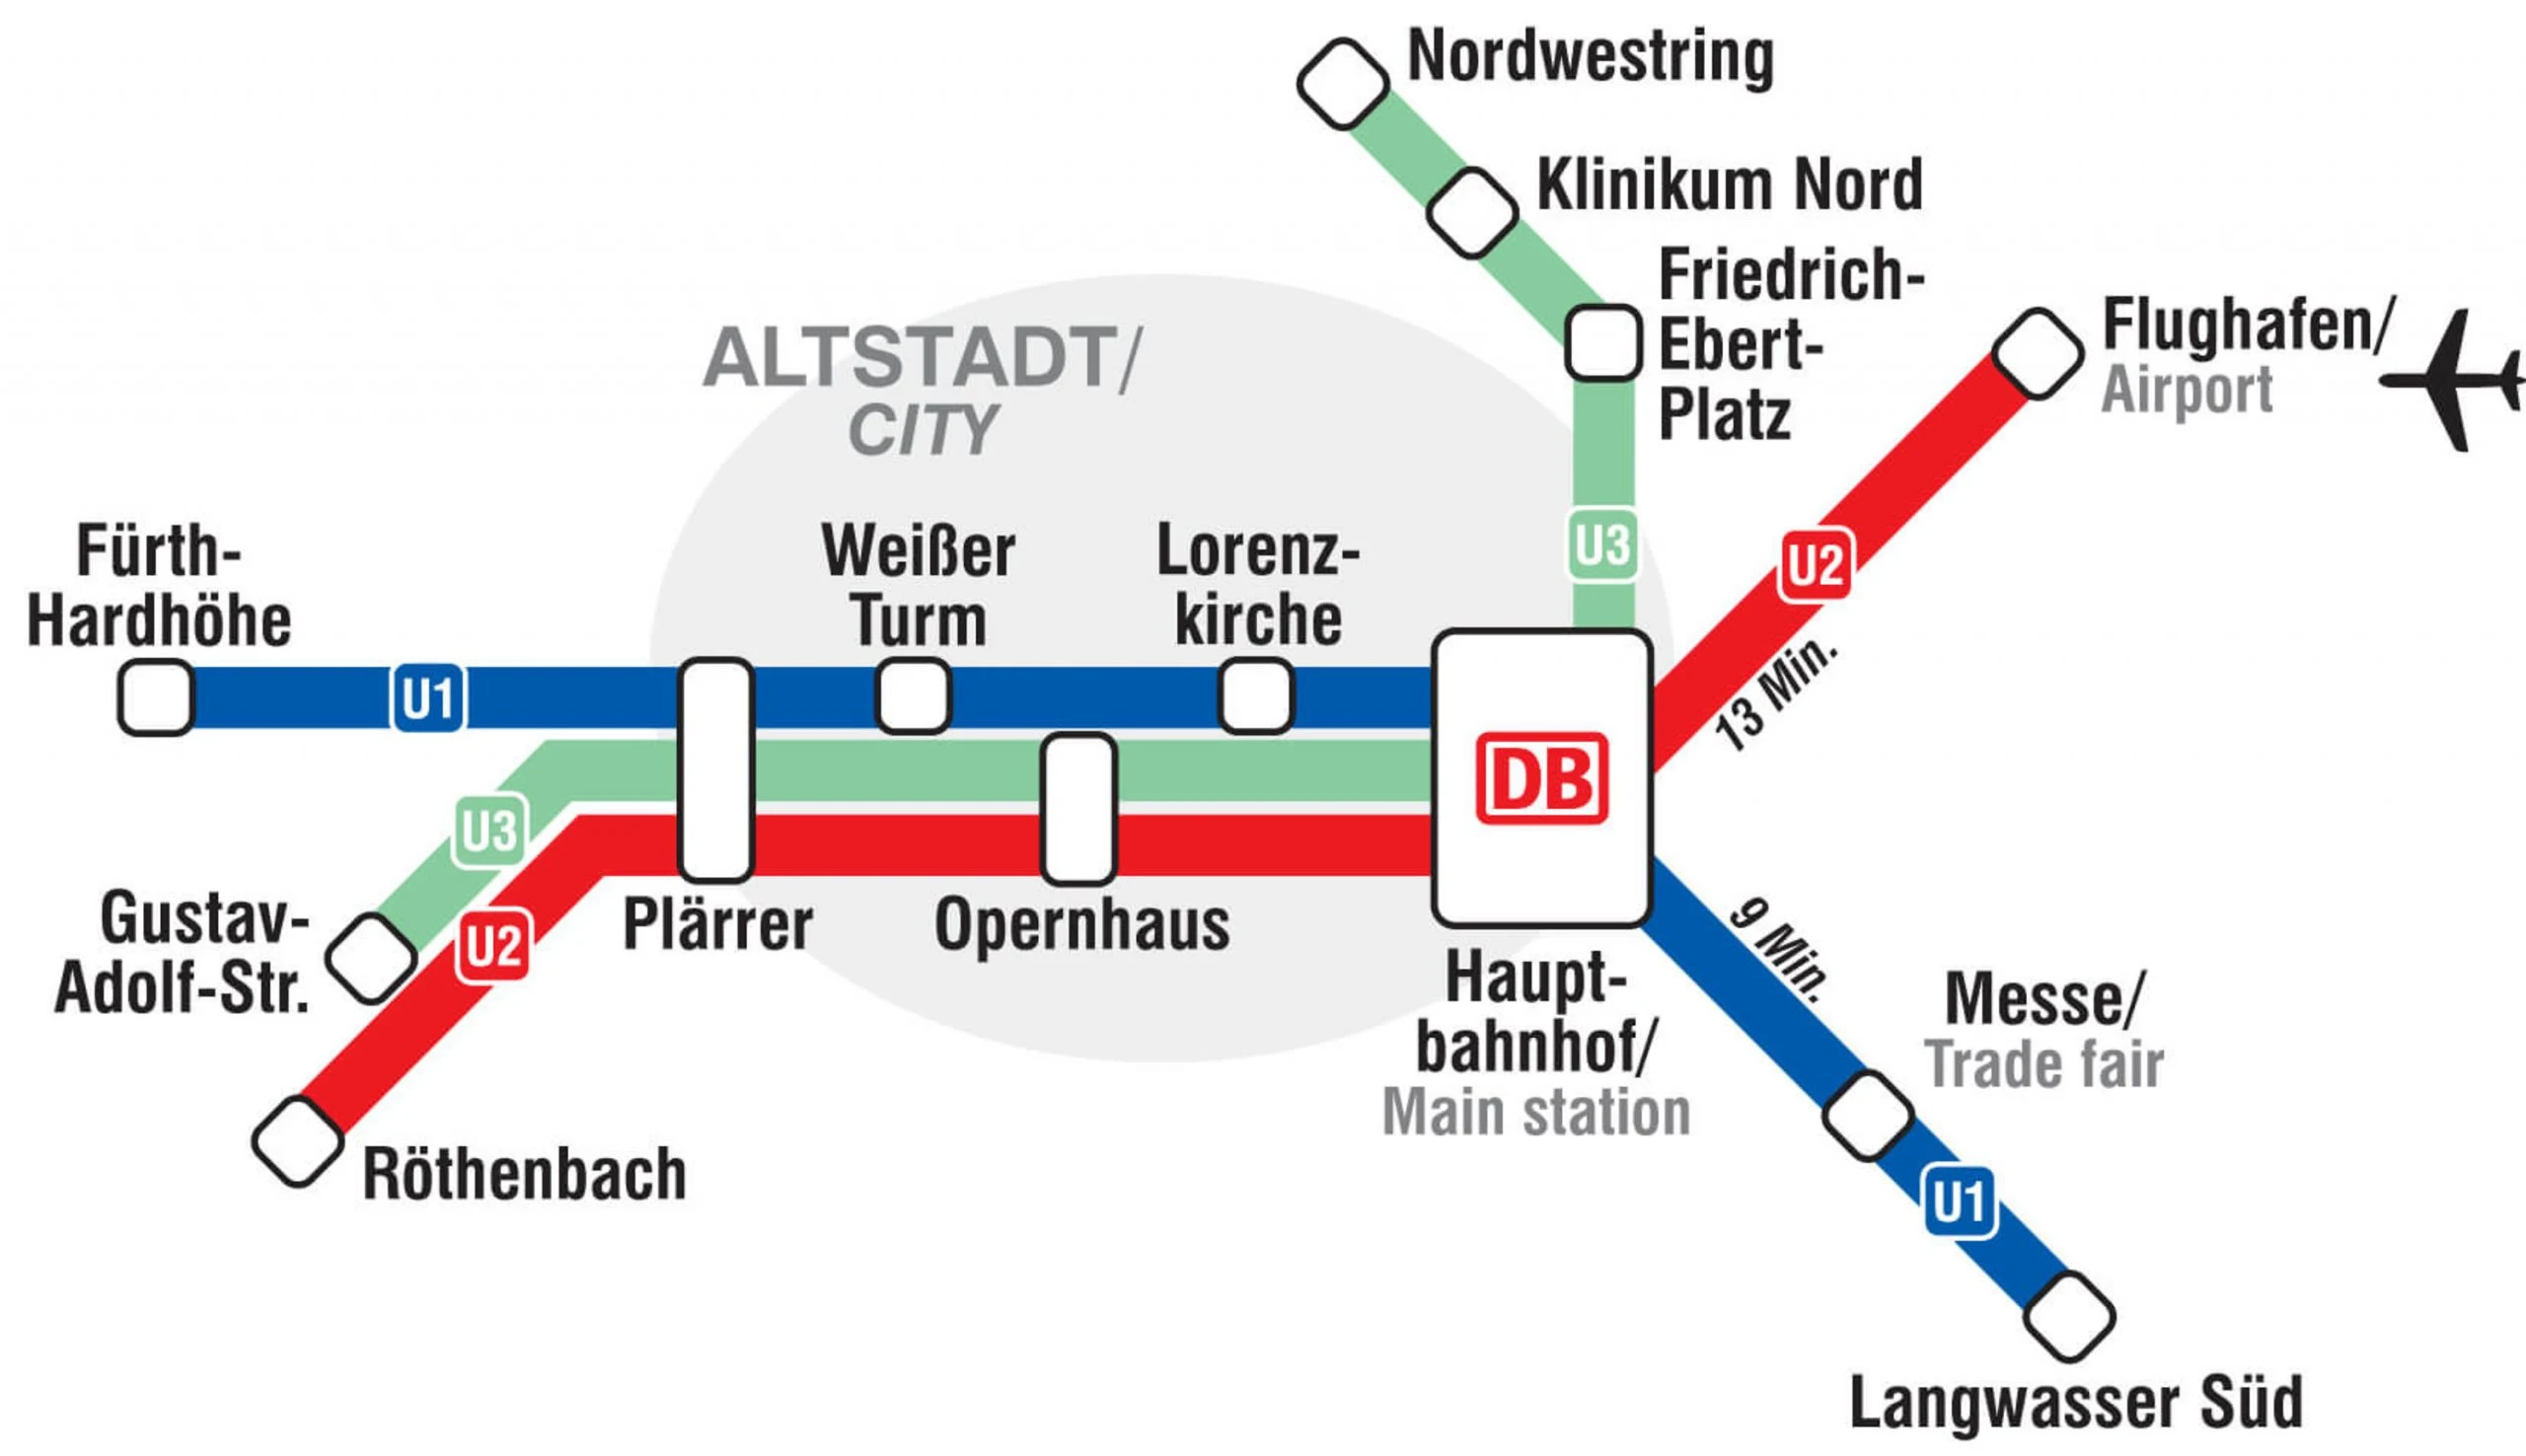 NUREMBERG METRO MAP, How To Get From Nuremberg Airport To City Center - All Possible Ways, cheapest way from Nuremberg airport to Downtown, cheapest way from Nuremberg airport to city, Nuremberg airport to city center, Nuremberg airport to Nuremberg, Nuremberg Bus Airport, bus from Nuremberg airport to city center, Train Nuremberg airport to city center, taxi Nuremberg airport to city center, Uber Nuremberg airport to city, metro Nuremberg airport to city center